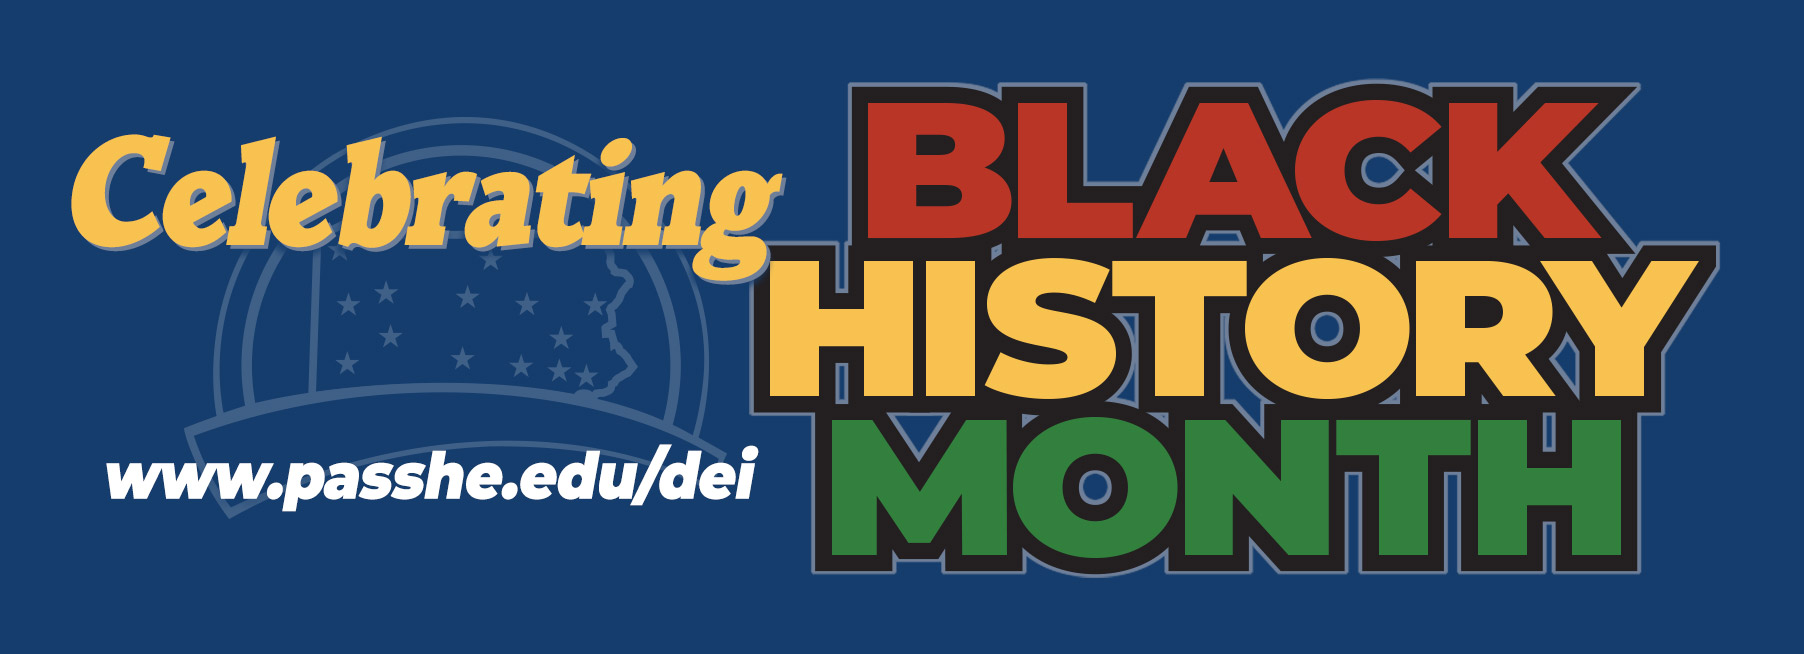 The State System Celebrates Black History Month